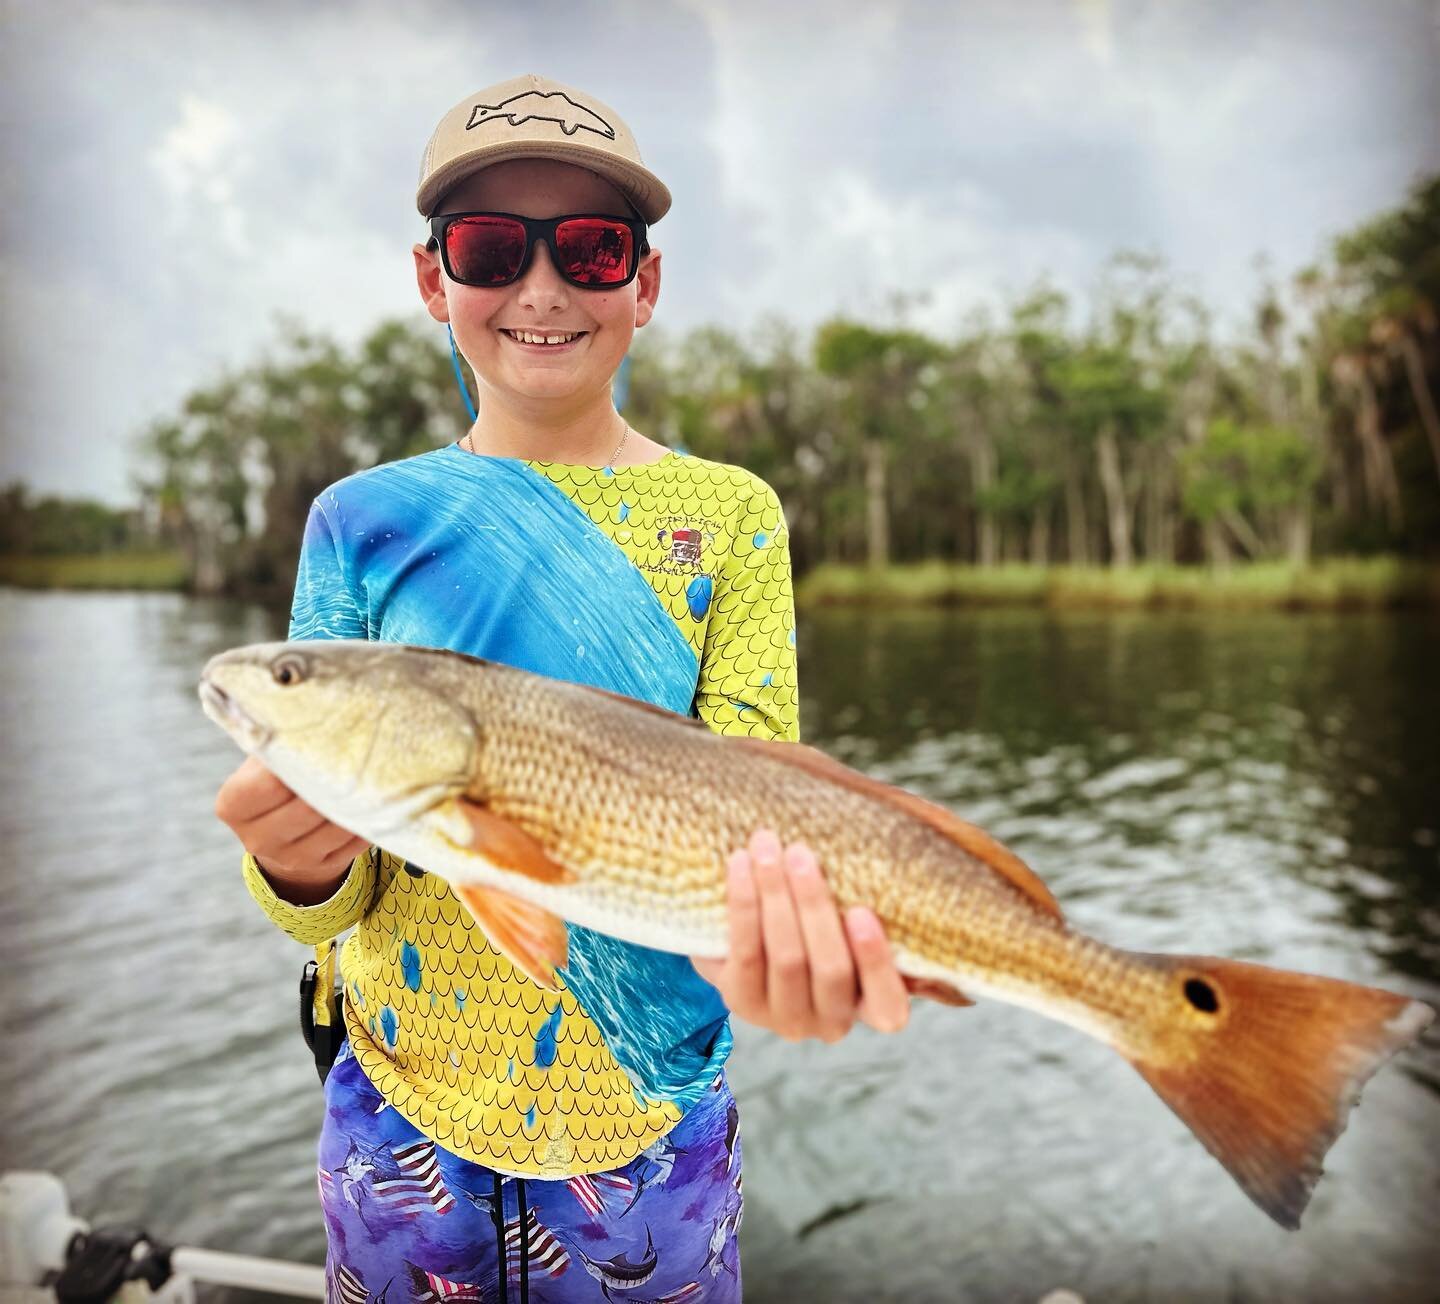 Quick trip this morning before the rain with Peanut for his birthday. We got ran in early by some storms but still caught a few. #crystalriver #captjameskerr
#crystalriverflatsfishing #fishing #naturecoast #seatrout #snook  #visitflorida #sodiumfishi